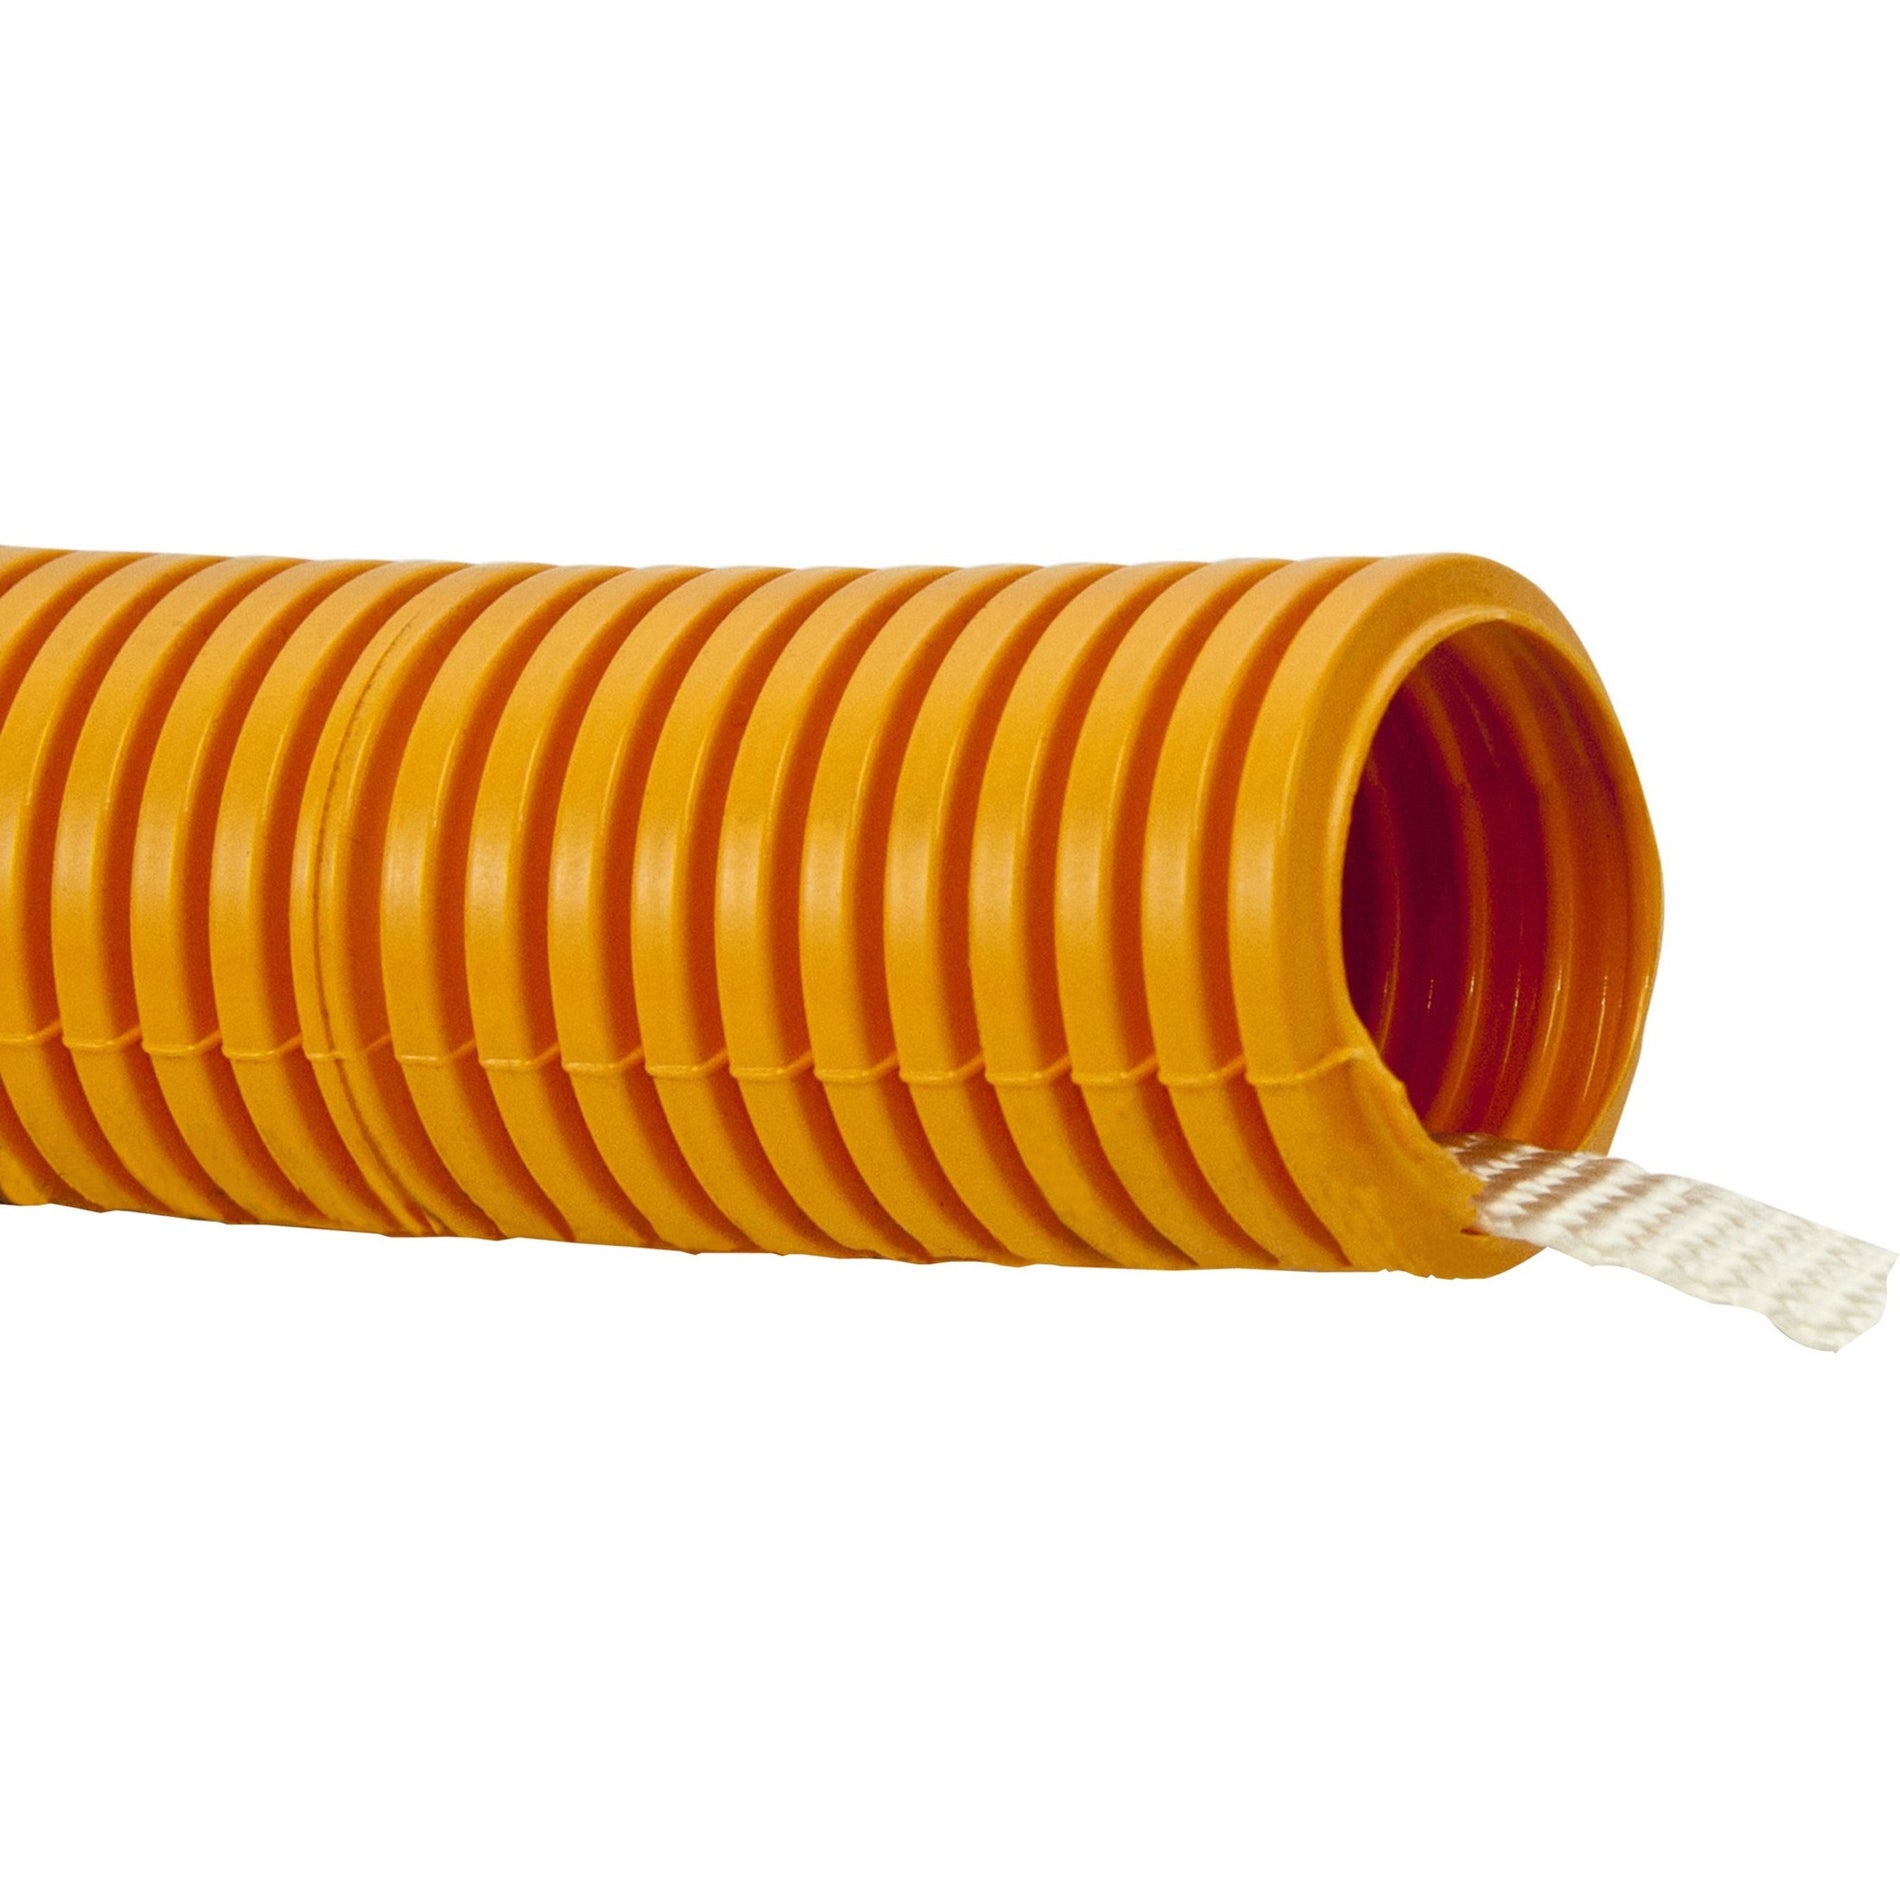 W Box RG100100 UL Listed Corrugated Flexible Conduit w/ Nylon Pull Tape 1" X 100', Orange Duct for Cable Routing